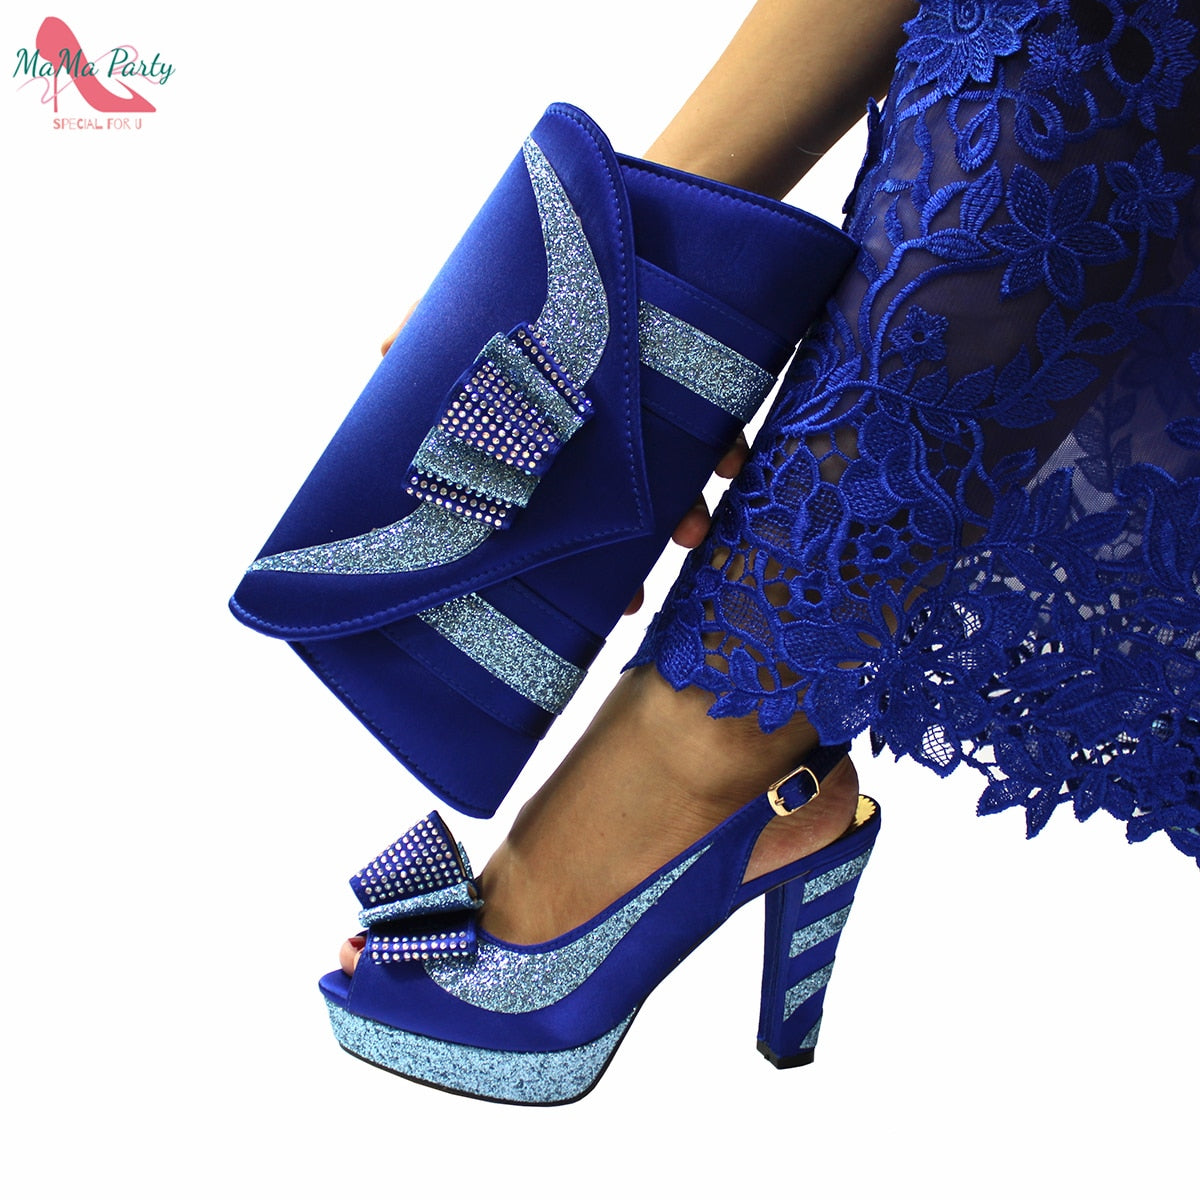 2022 Spring New Arrivals Slingbacks Sandals with Platform in Royal Blue Color High Quality African Women Shoes and Bag Set